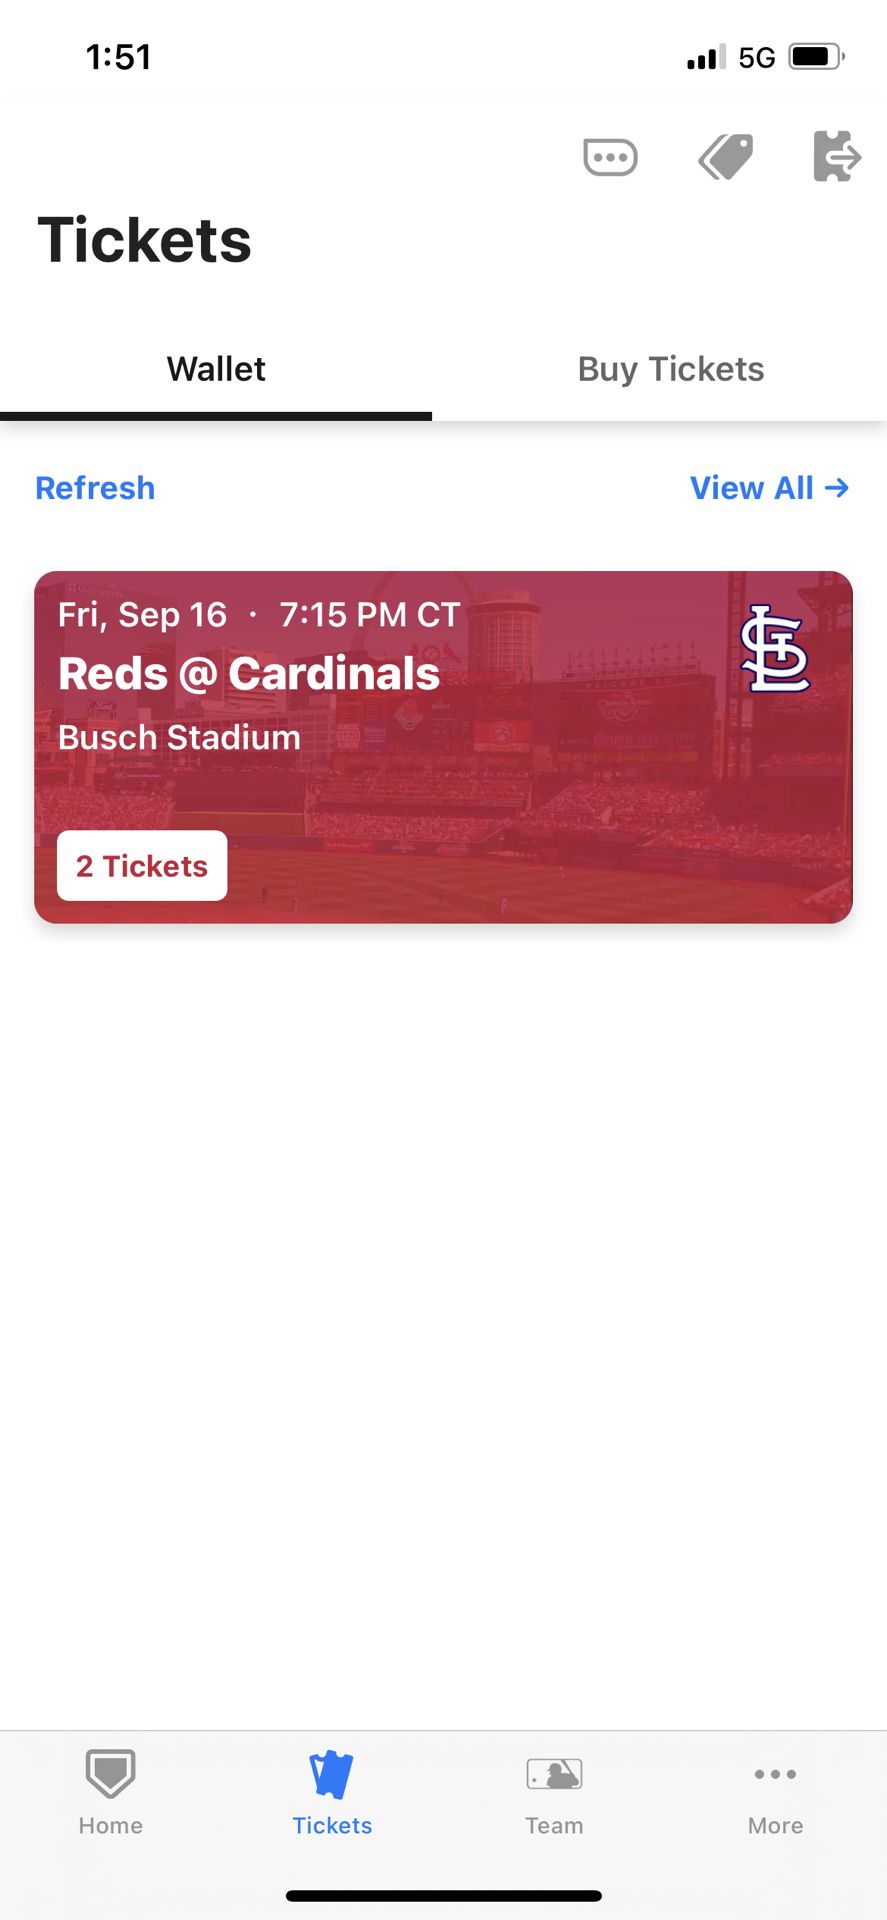 2 St.Louis  Cardinal tickets for Friday game on September 16